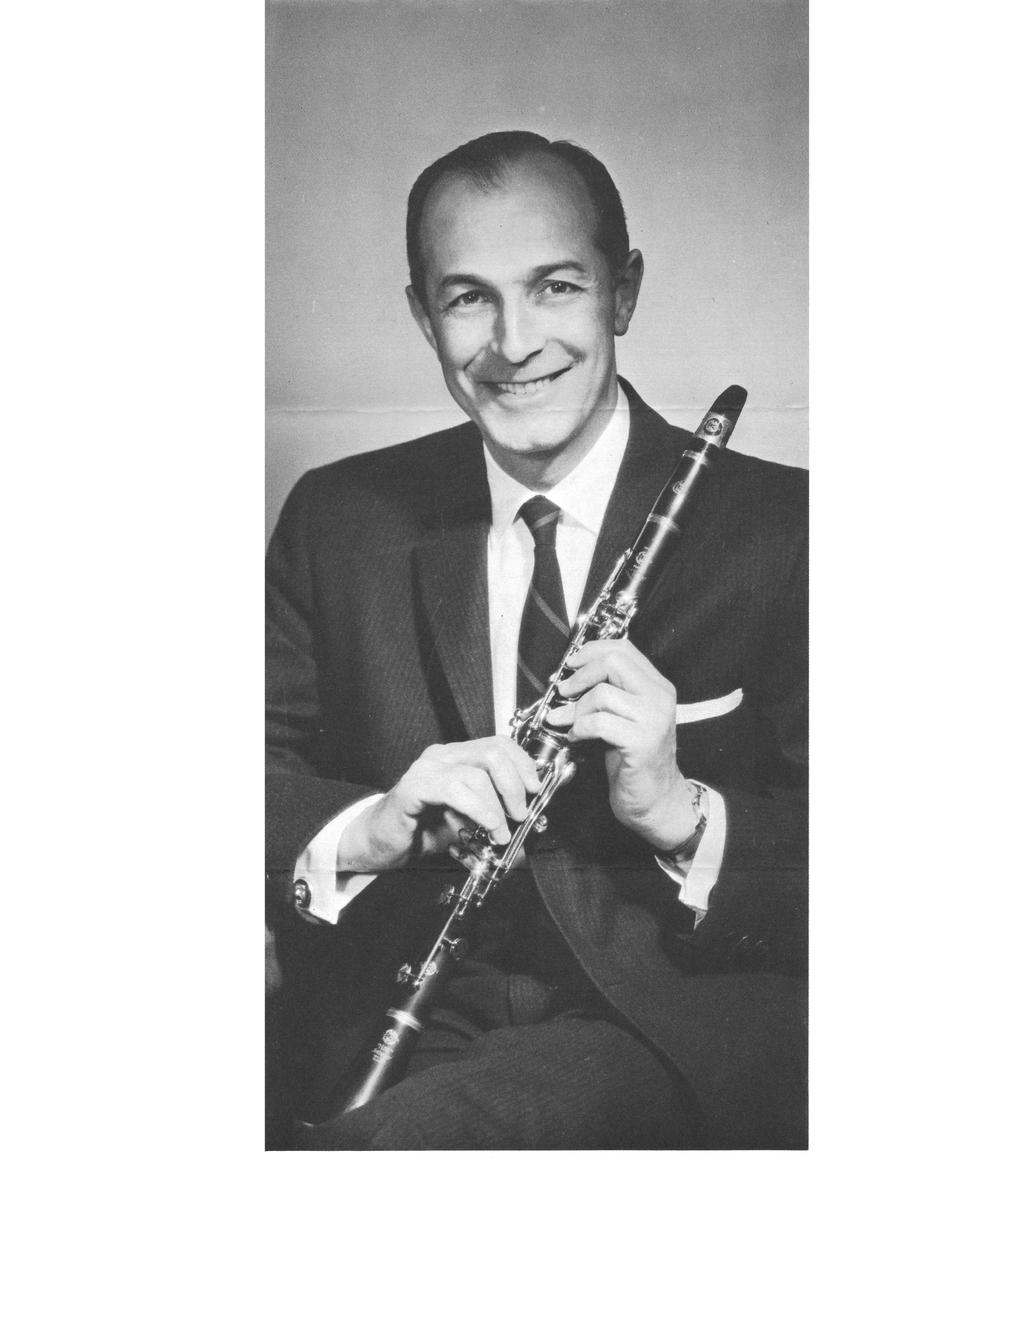 As a clarinet virtuoso, SIDNEY FORREST (1918-2013) ranked at the top of the profession.